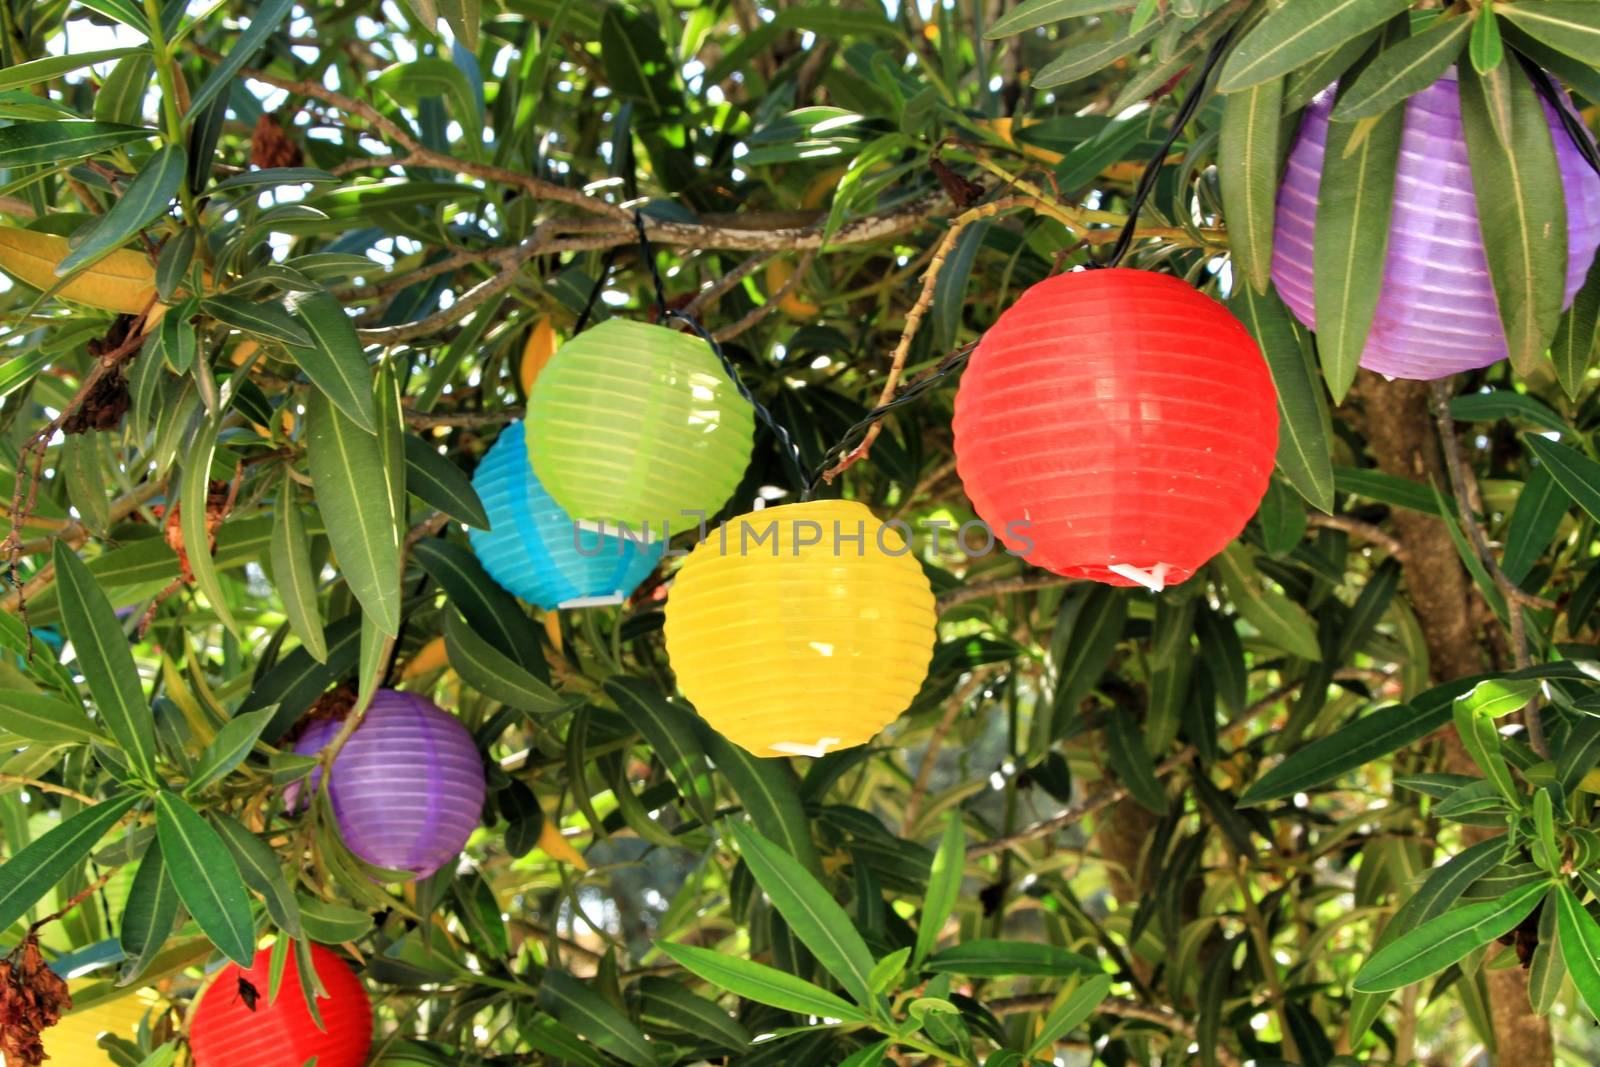 Colored round lanterns hanging on a tree in the garden